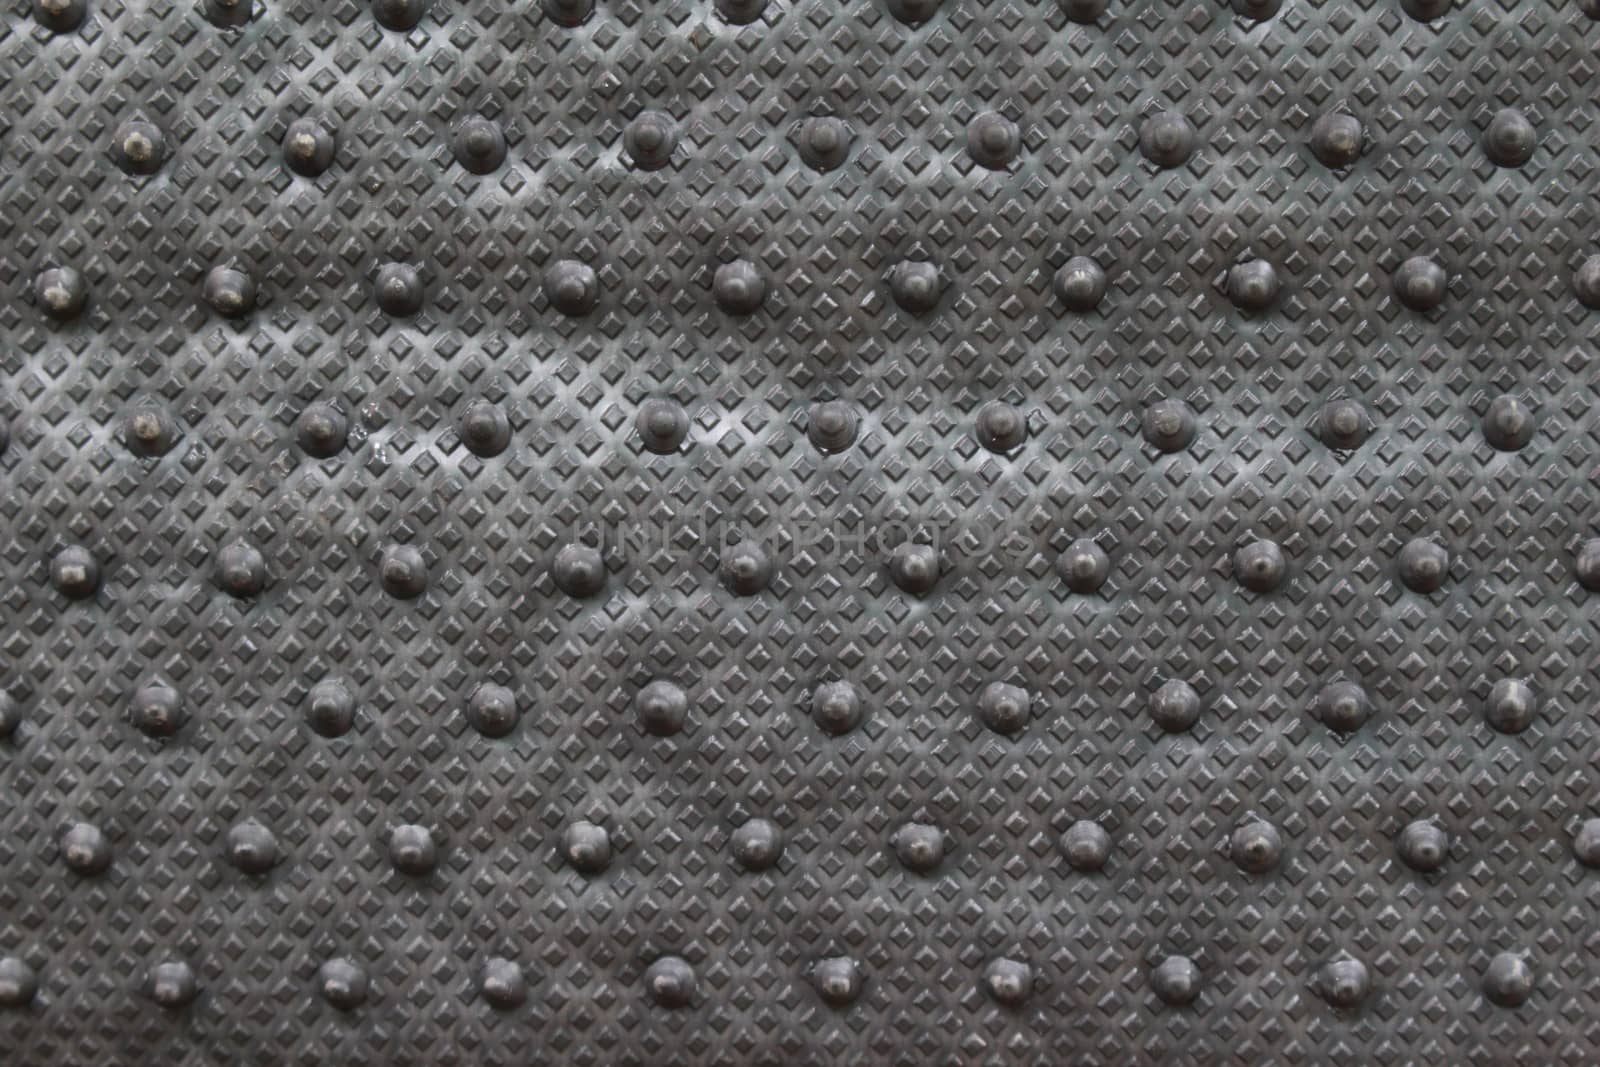 Plastic patterned to prevent slipping.